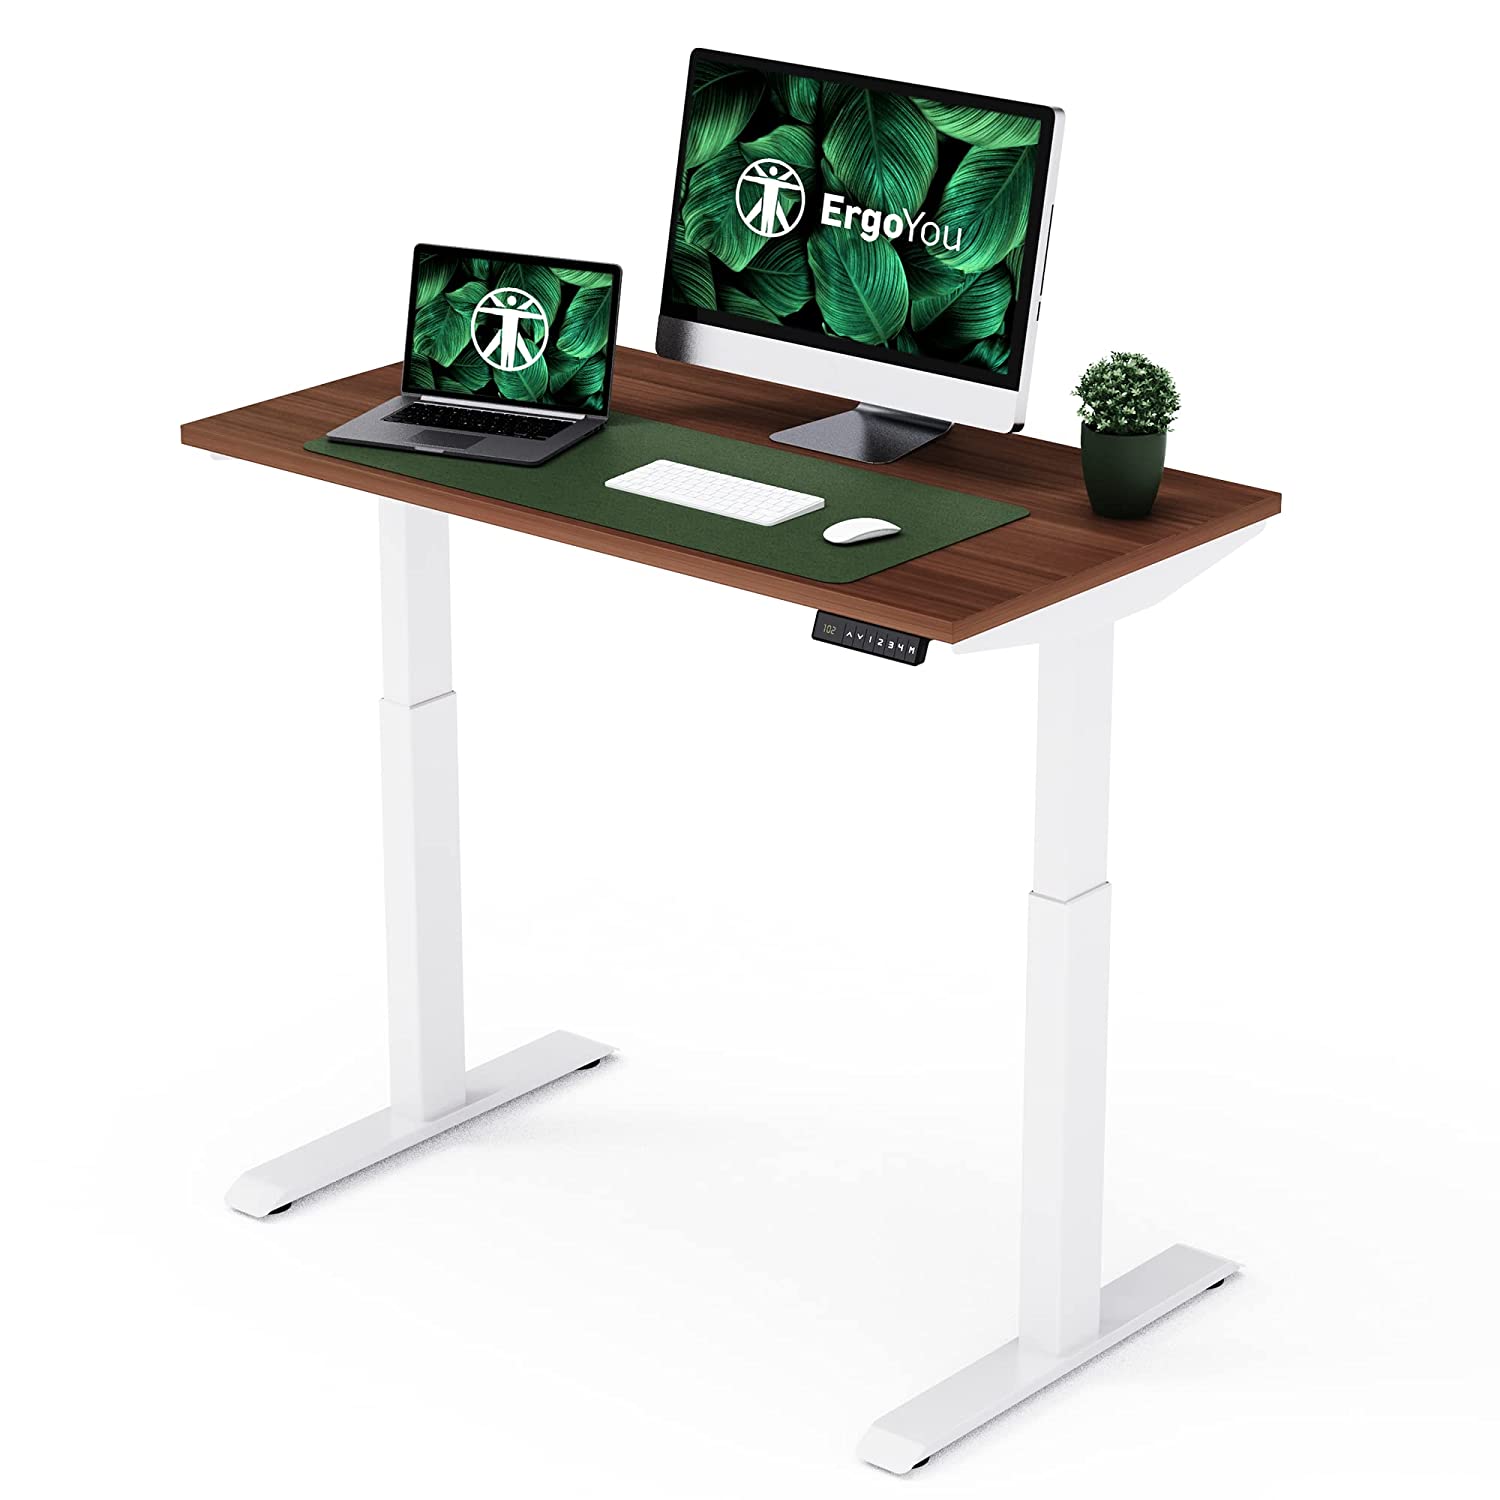 ErgoYou - Electric Height Adjustable Table 47 X 23.5 Inches - Dual Motor 2 Stage - Ergonomic Sit Stand Computer Electric work desk - Imported (Walnut Laminate Table Top/White Frame